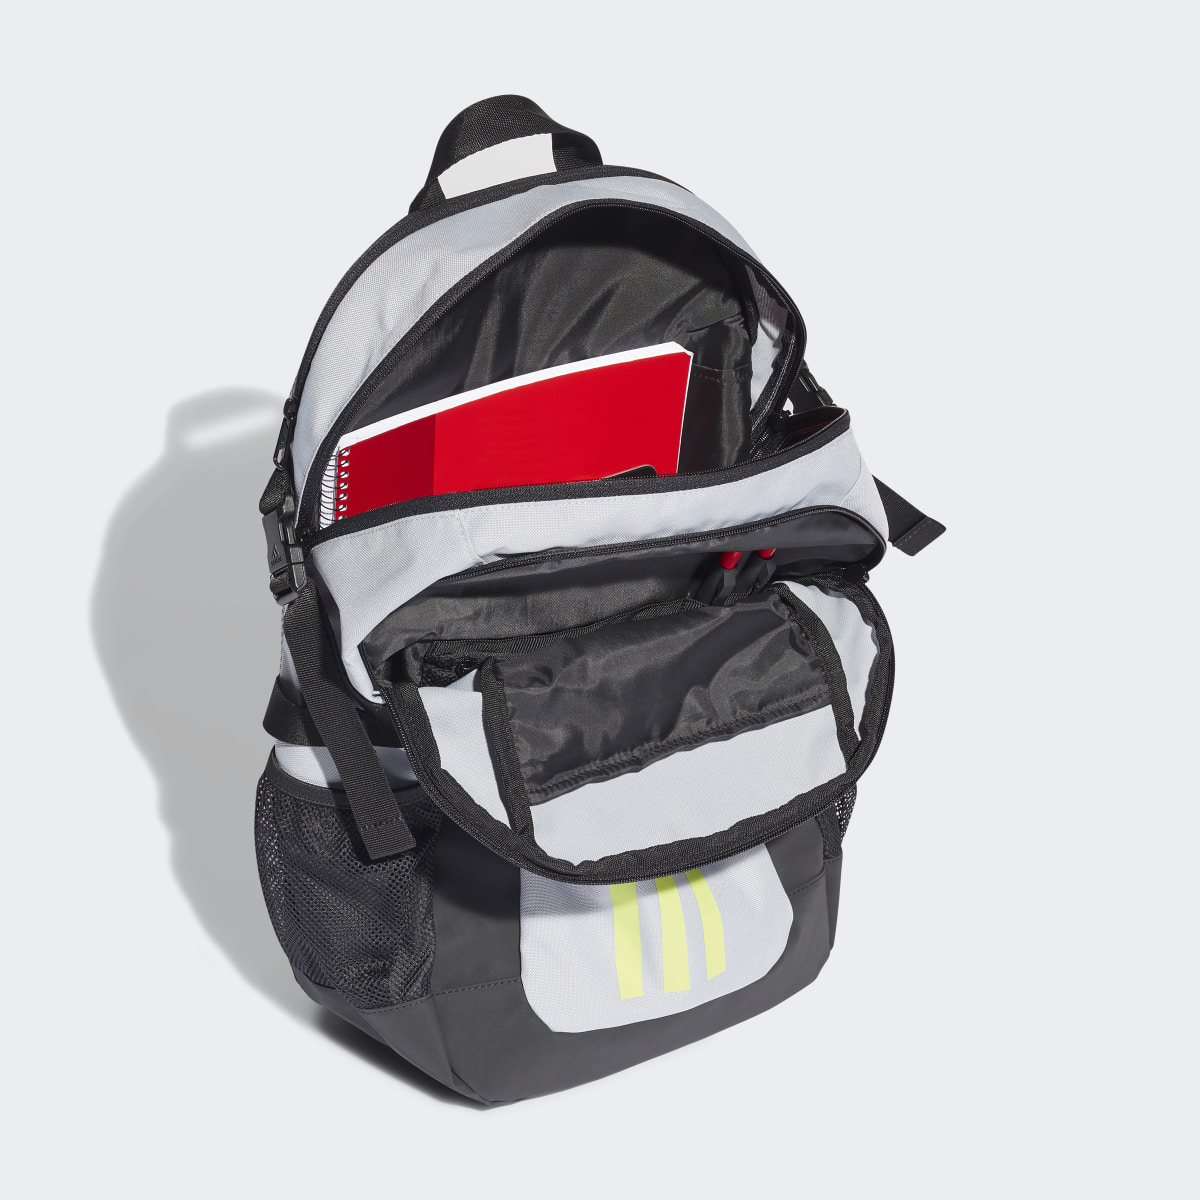 Adidas Power Backpack. 5